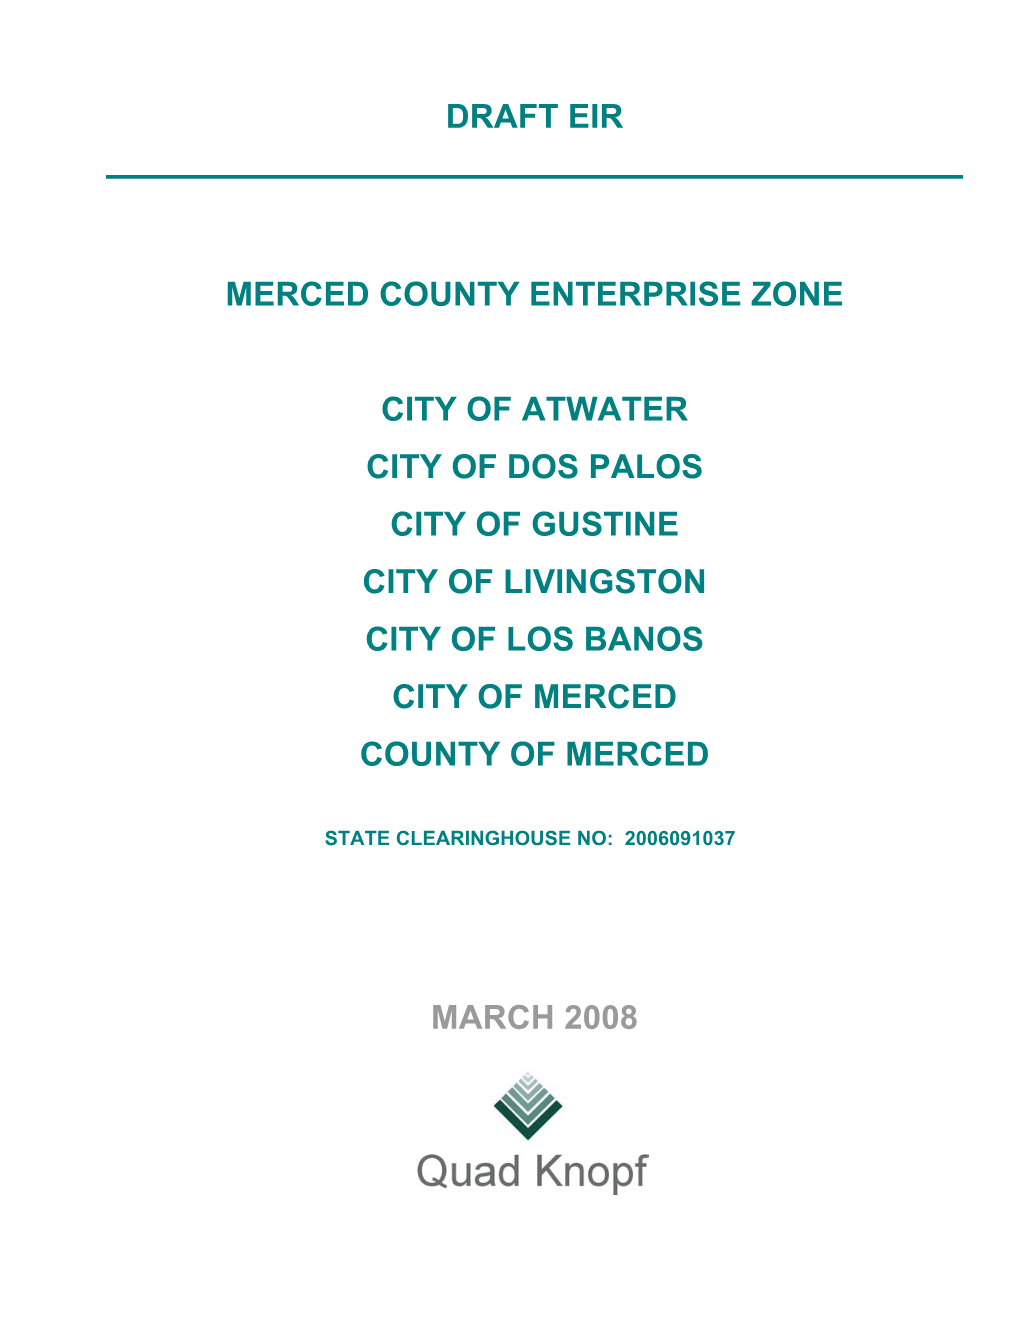 Draft Eir Merced County Enterprise Zone City of Atwater City of Dos Palos City of Gustine City of Livingston City of Los Banos City of Merced County of Merced